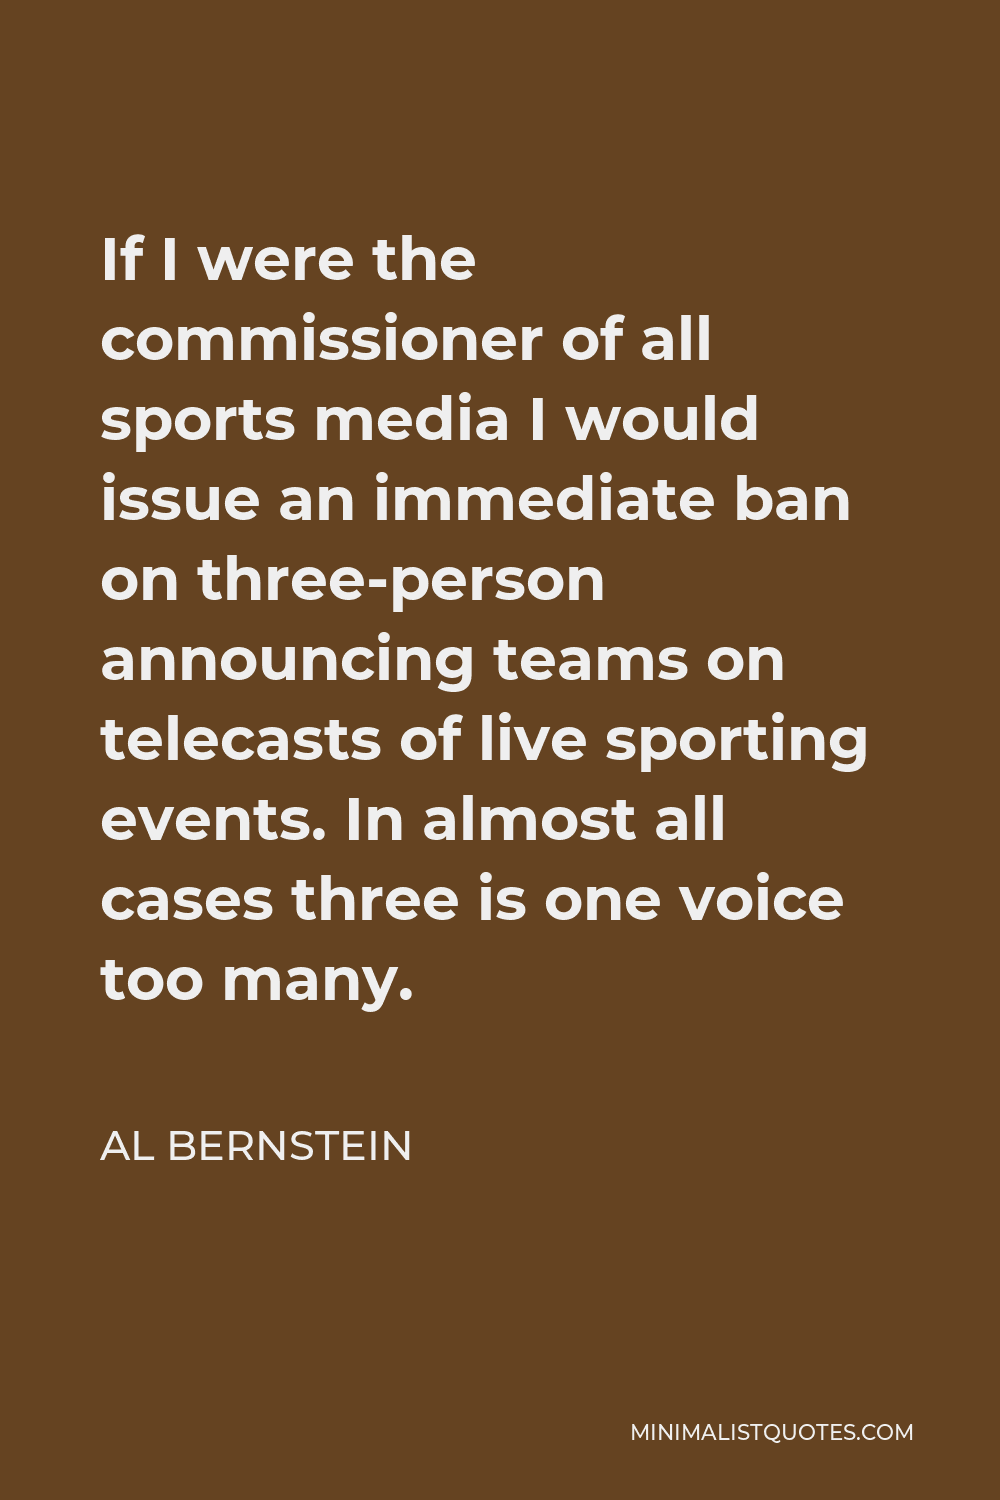 Al Bernstein Quote - If I were the commissioner of all sports media I would issue an immediate ban on three-person announcing teams on telecasts of live sporting events. In almost all cases three is one voice too many.